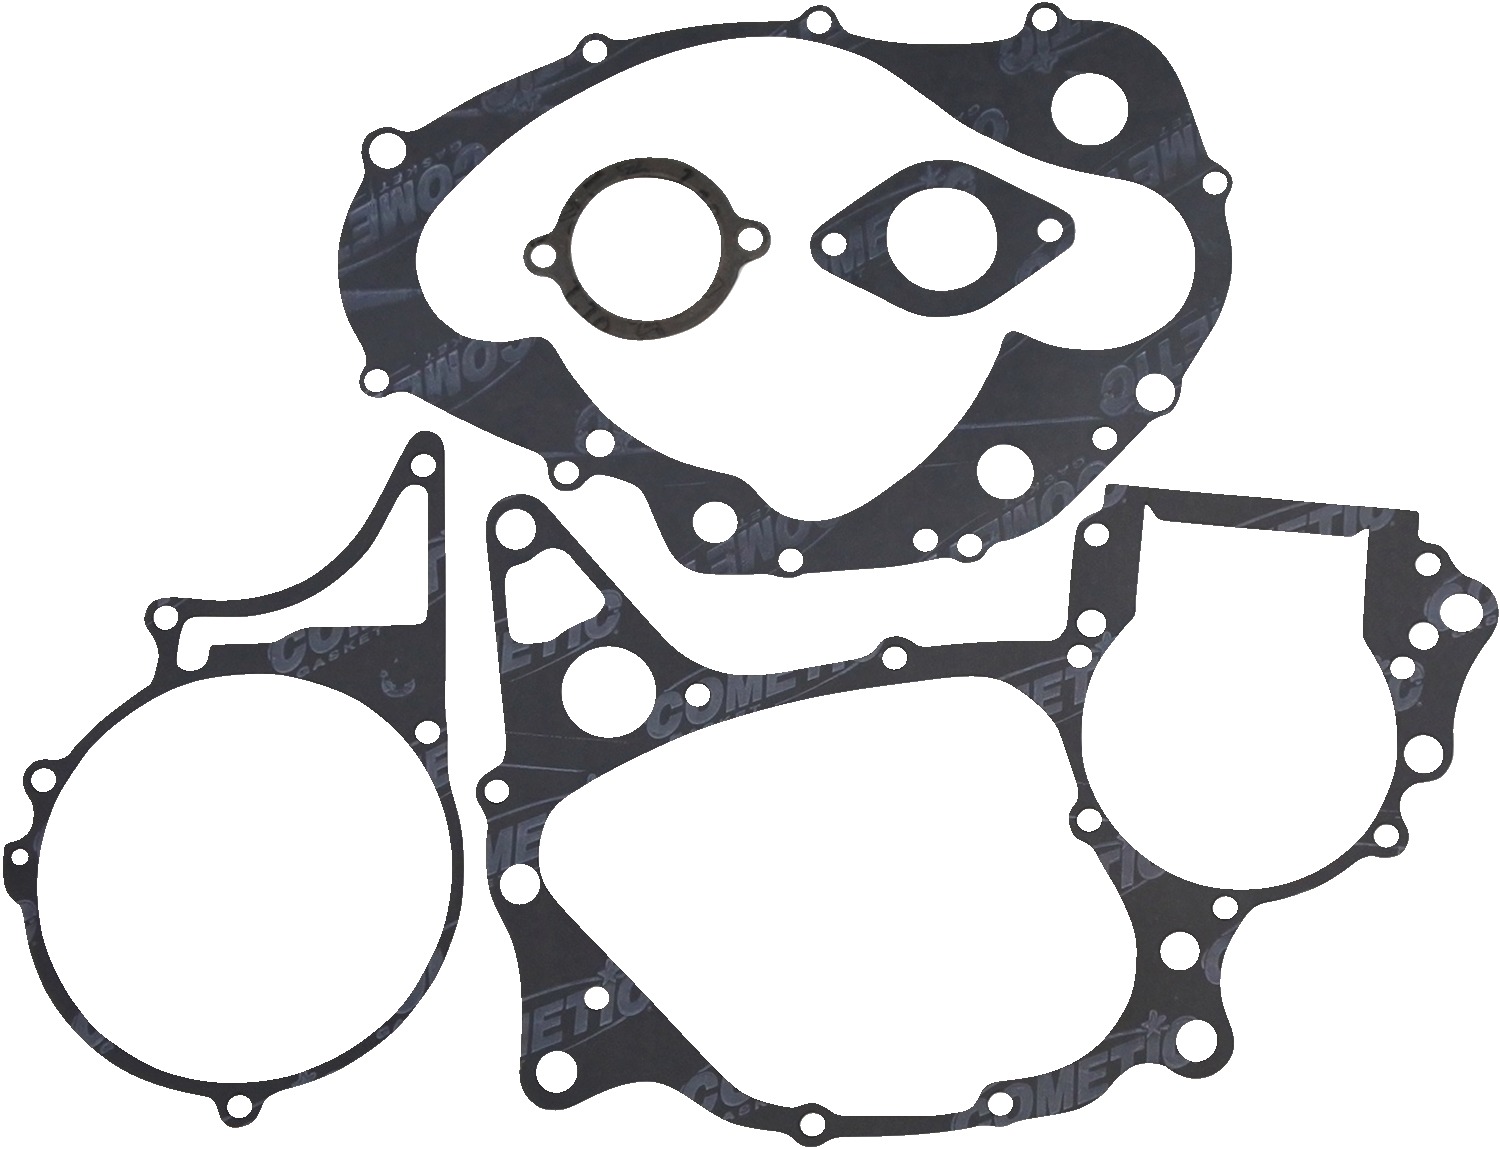 Lower Engine Gasket Kit - For 74-75 Honda CR125 - Click Image to Close